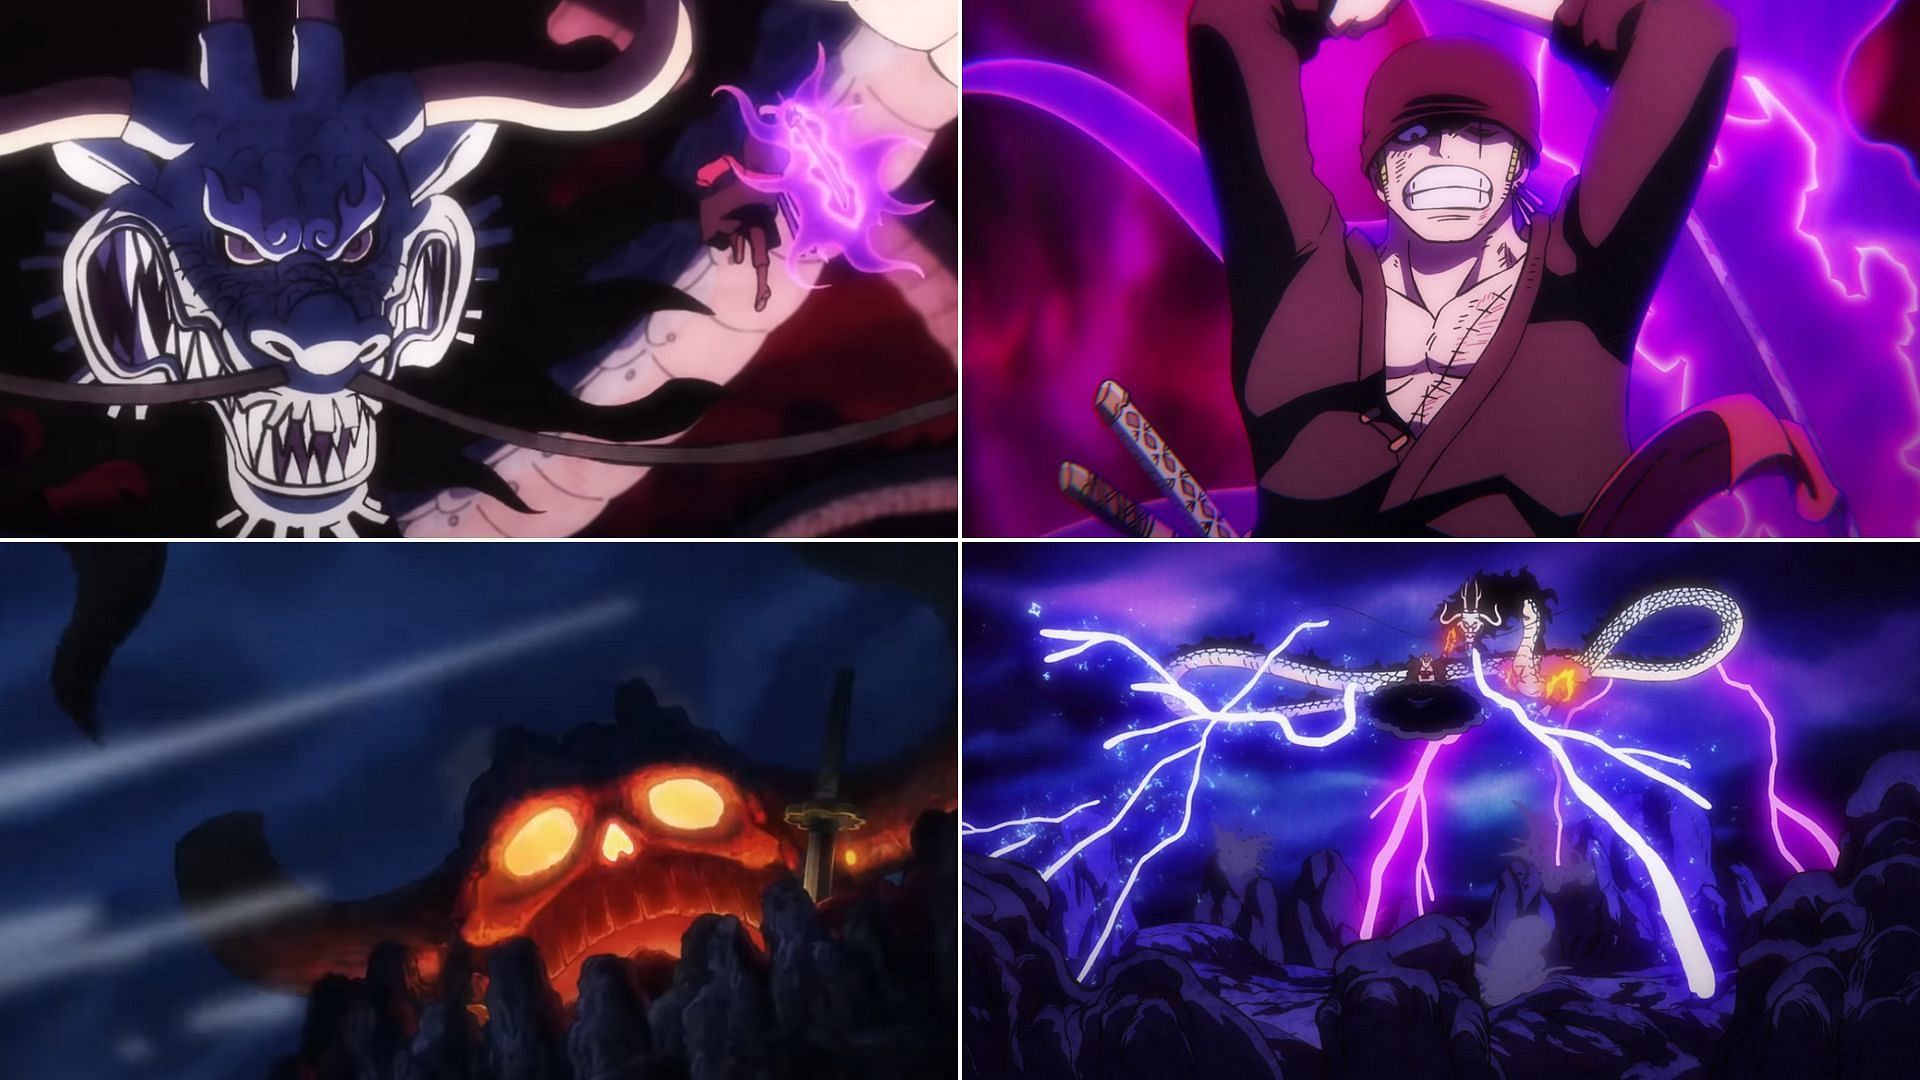 One Piece Episode 1017: Killer Almost Killed Kaido with His Technique!